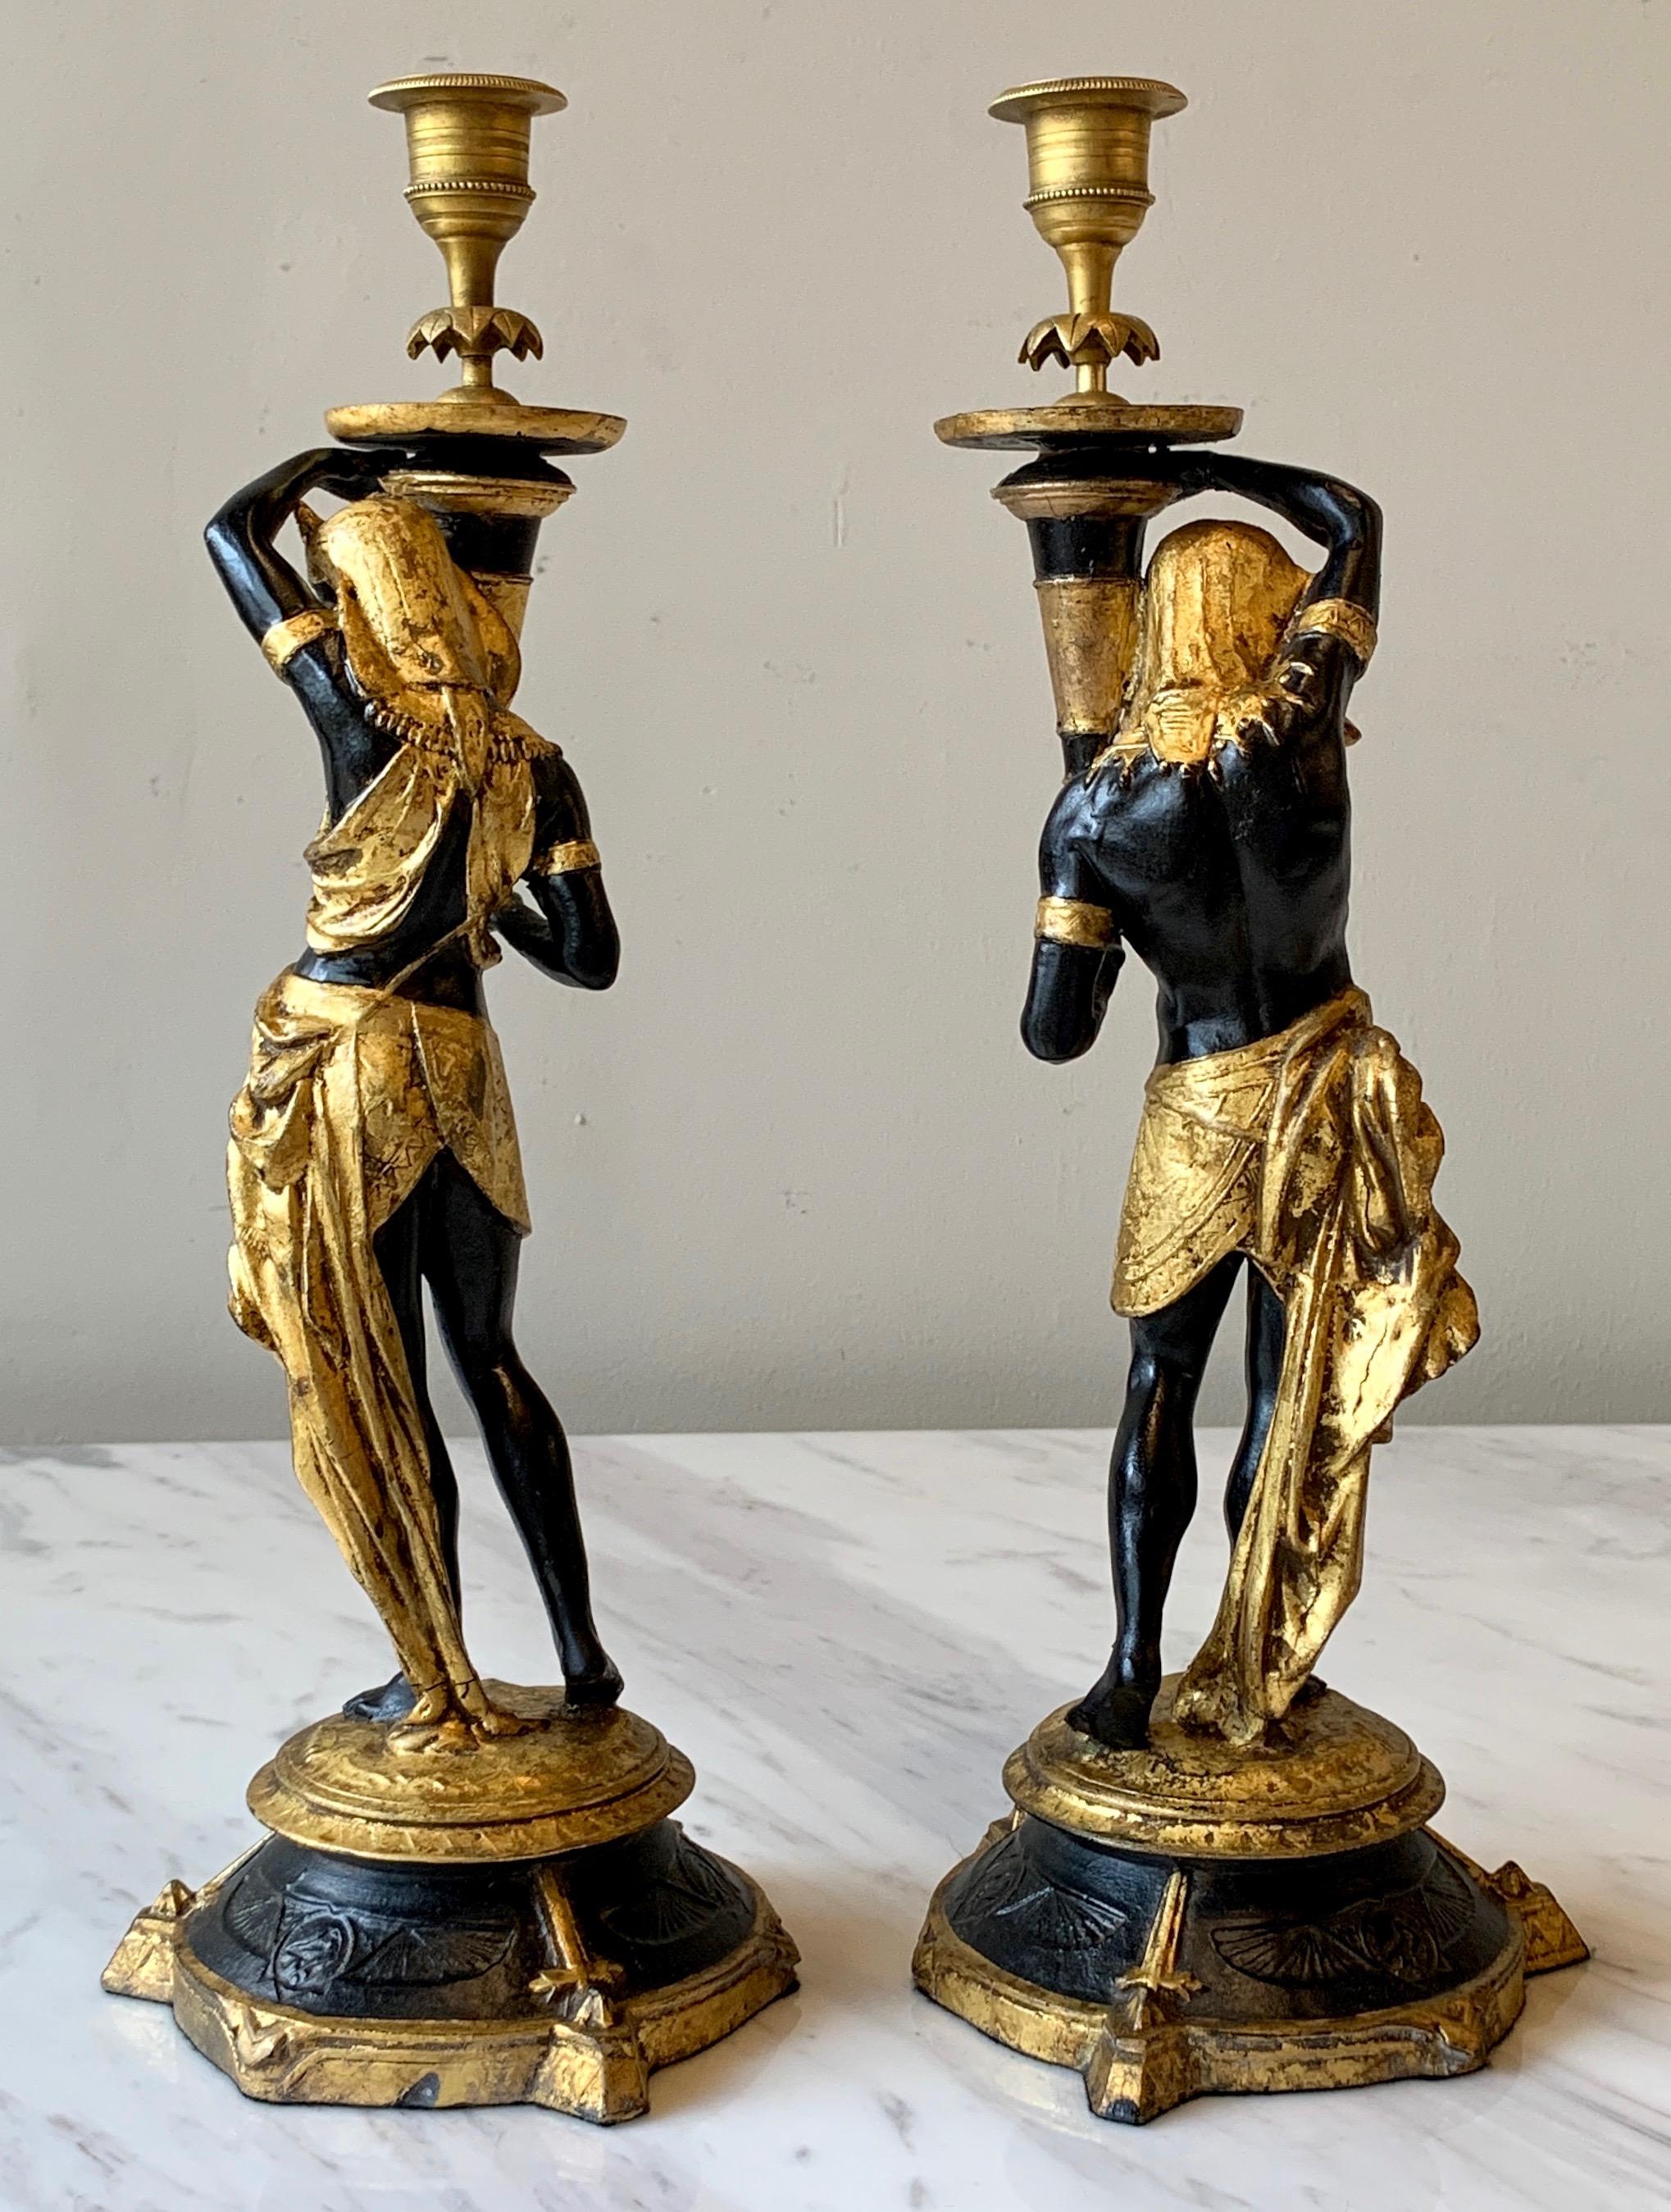 Cast Pair of Egyptian Revival Candlesticks